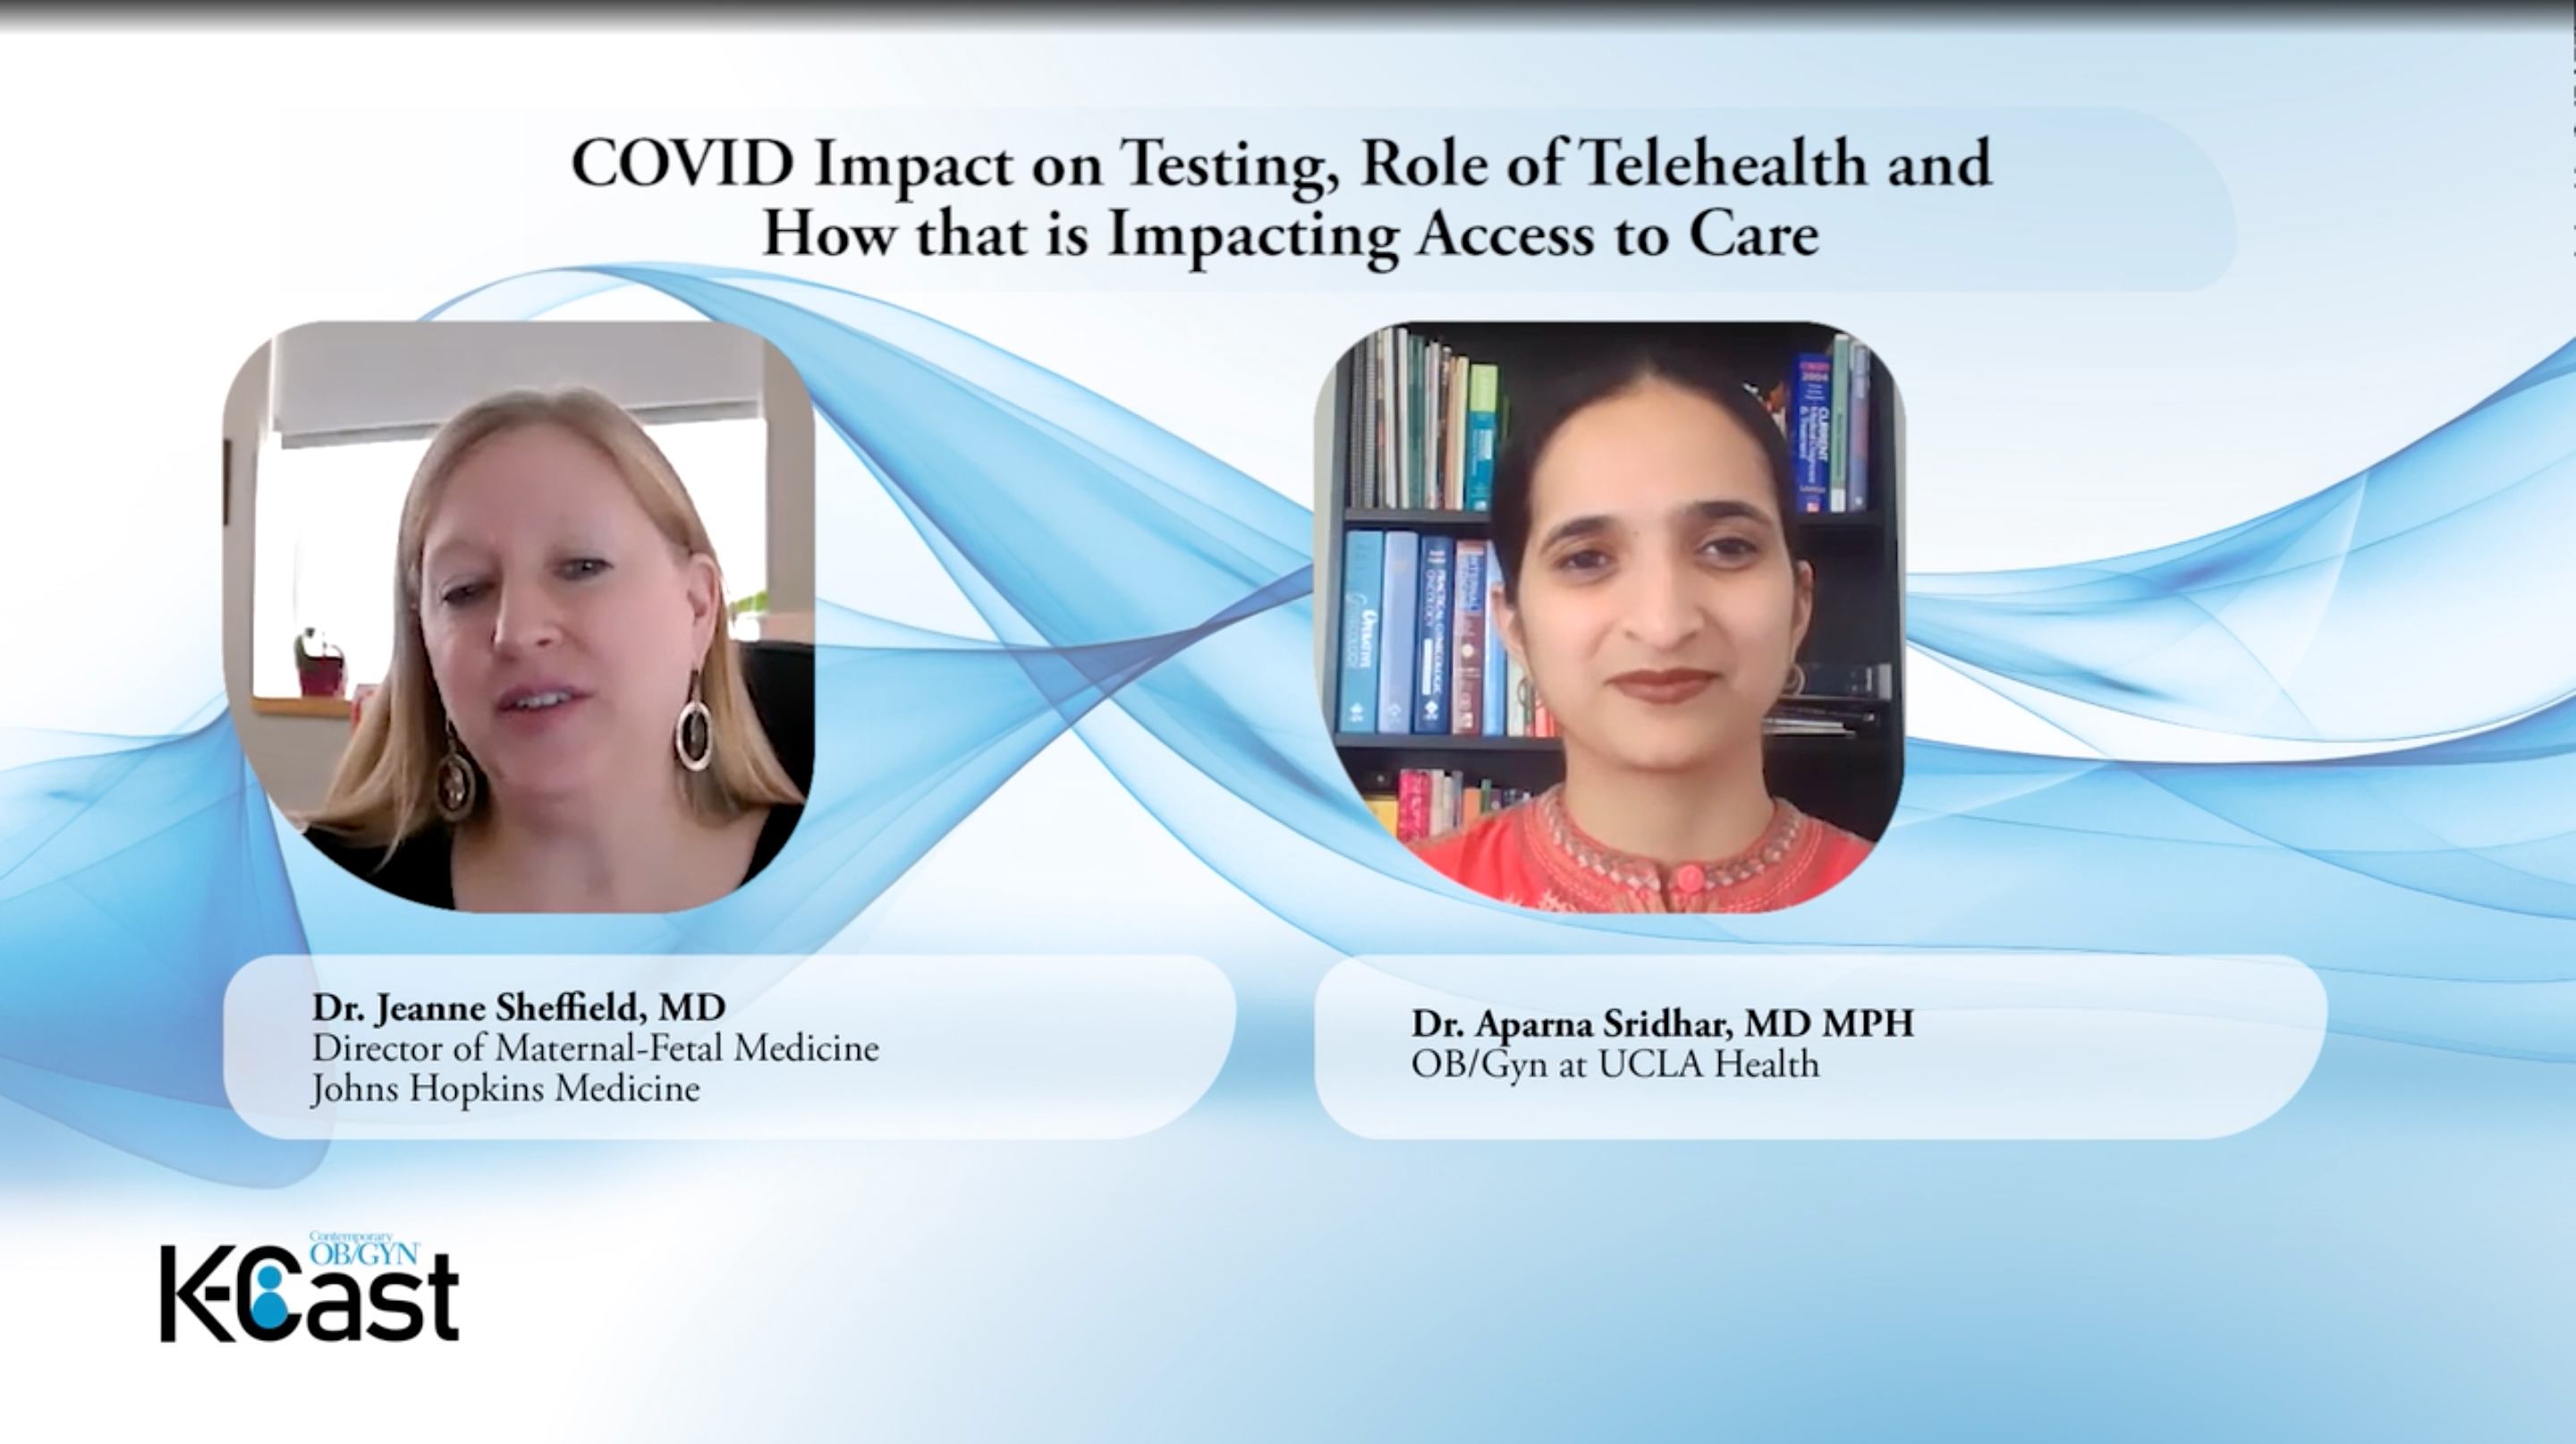 COVID Impact on Testing, Role of Telehealth and How that is Impacting Access to Care